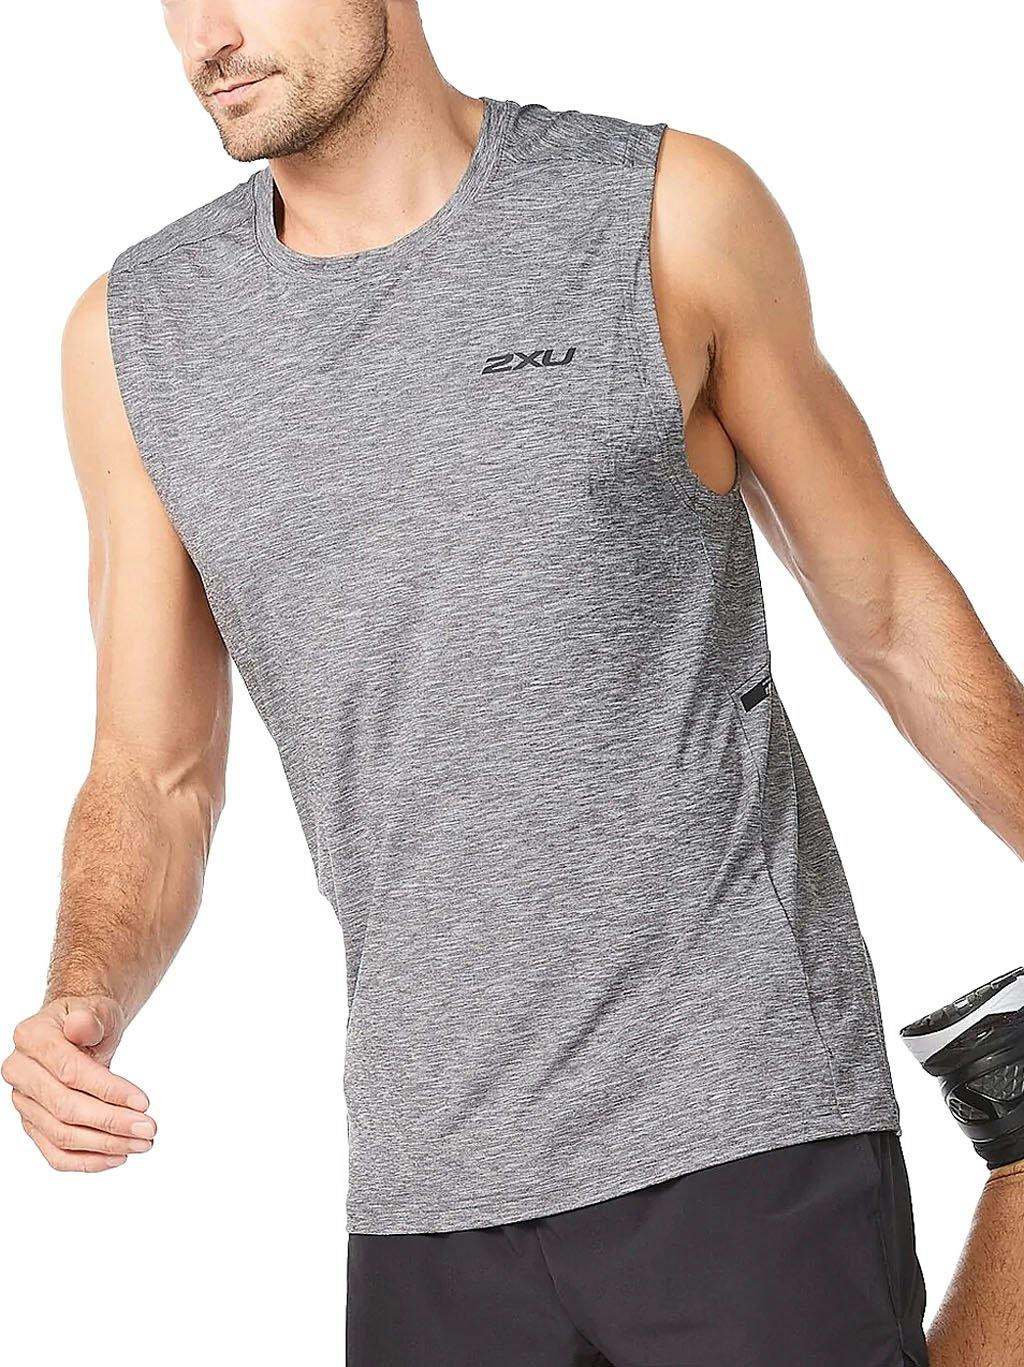 Product image for Motion Tank - Men's